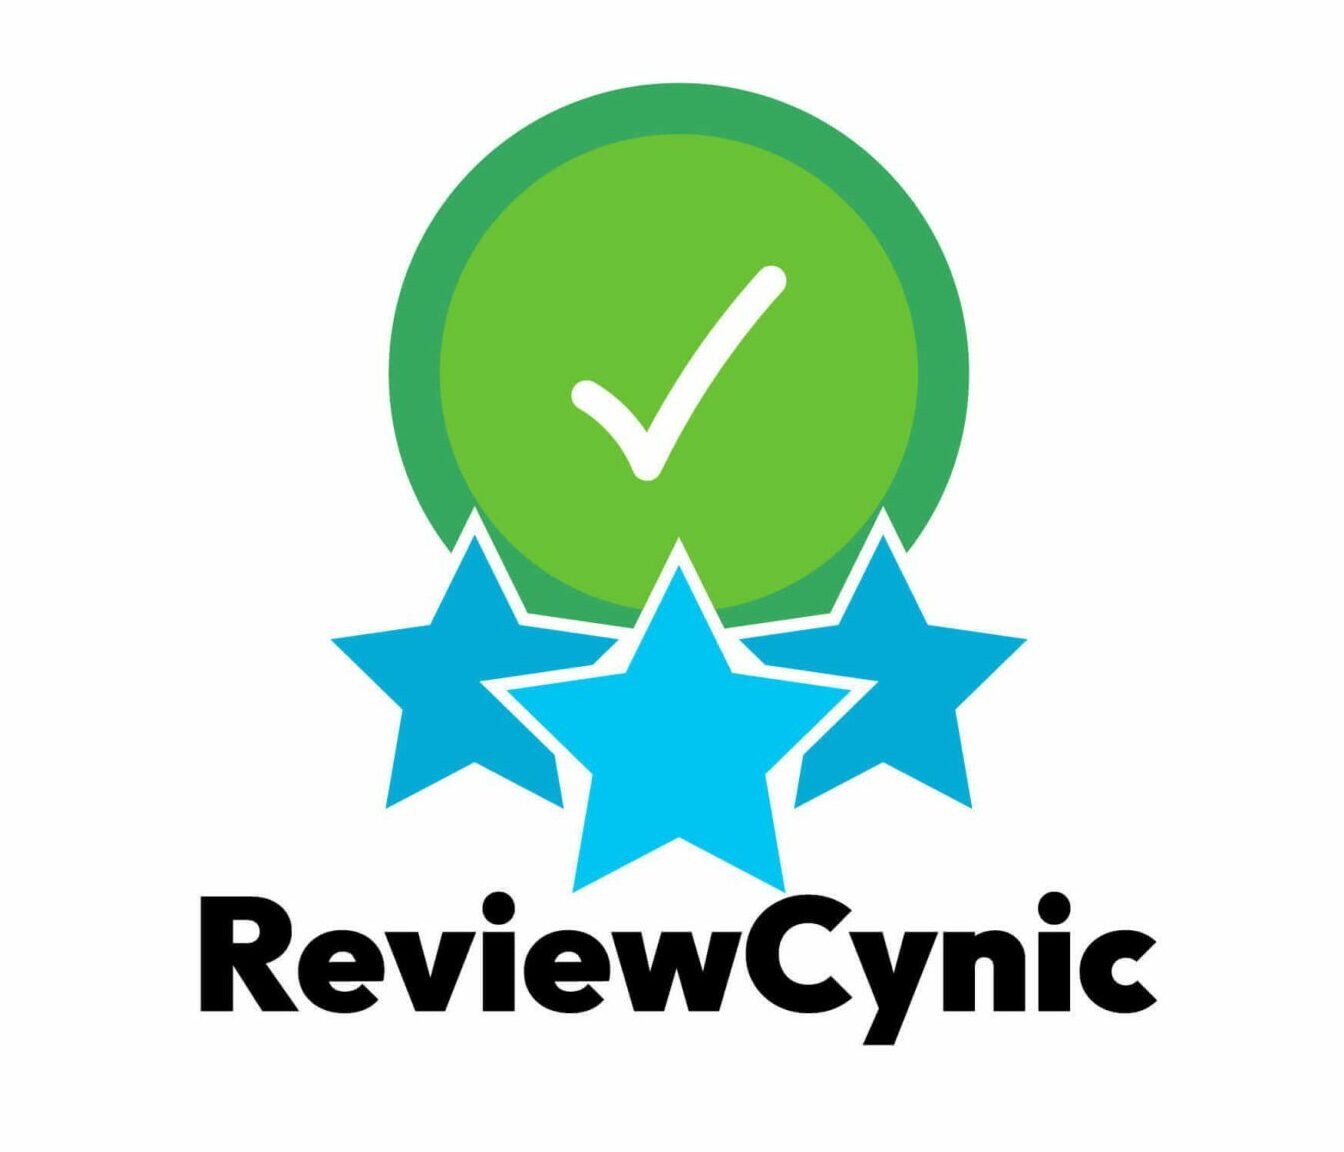 Graphically Review Cynic 2